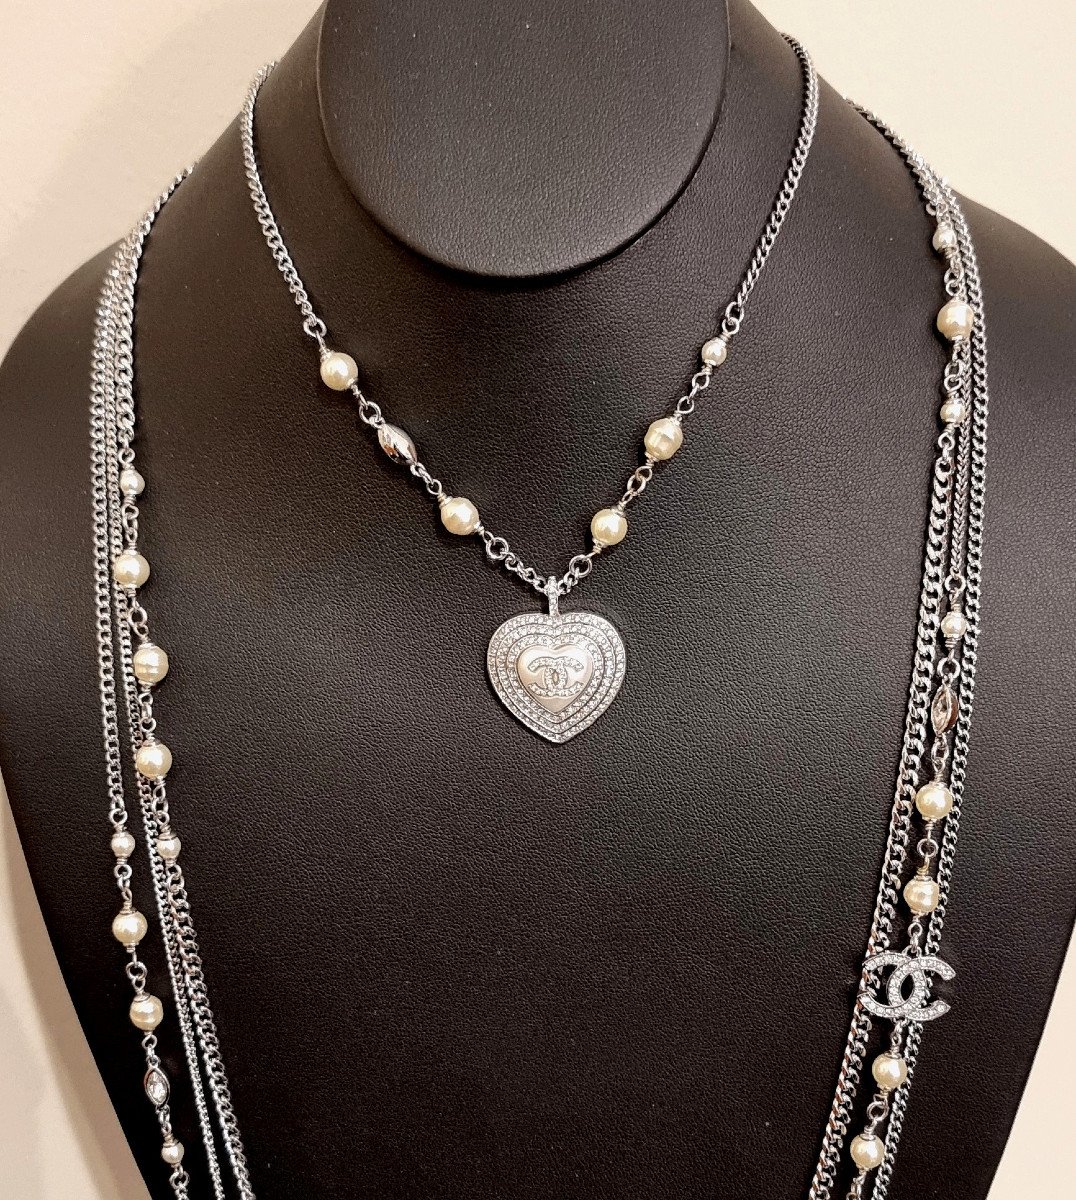 Chanel Long Necklace 4 Rows Heart Double Cc Crystal -photo-1